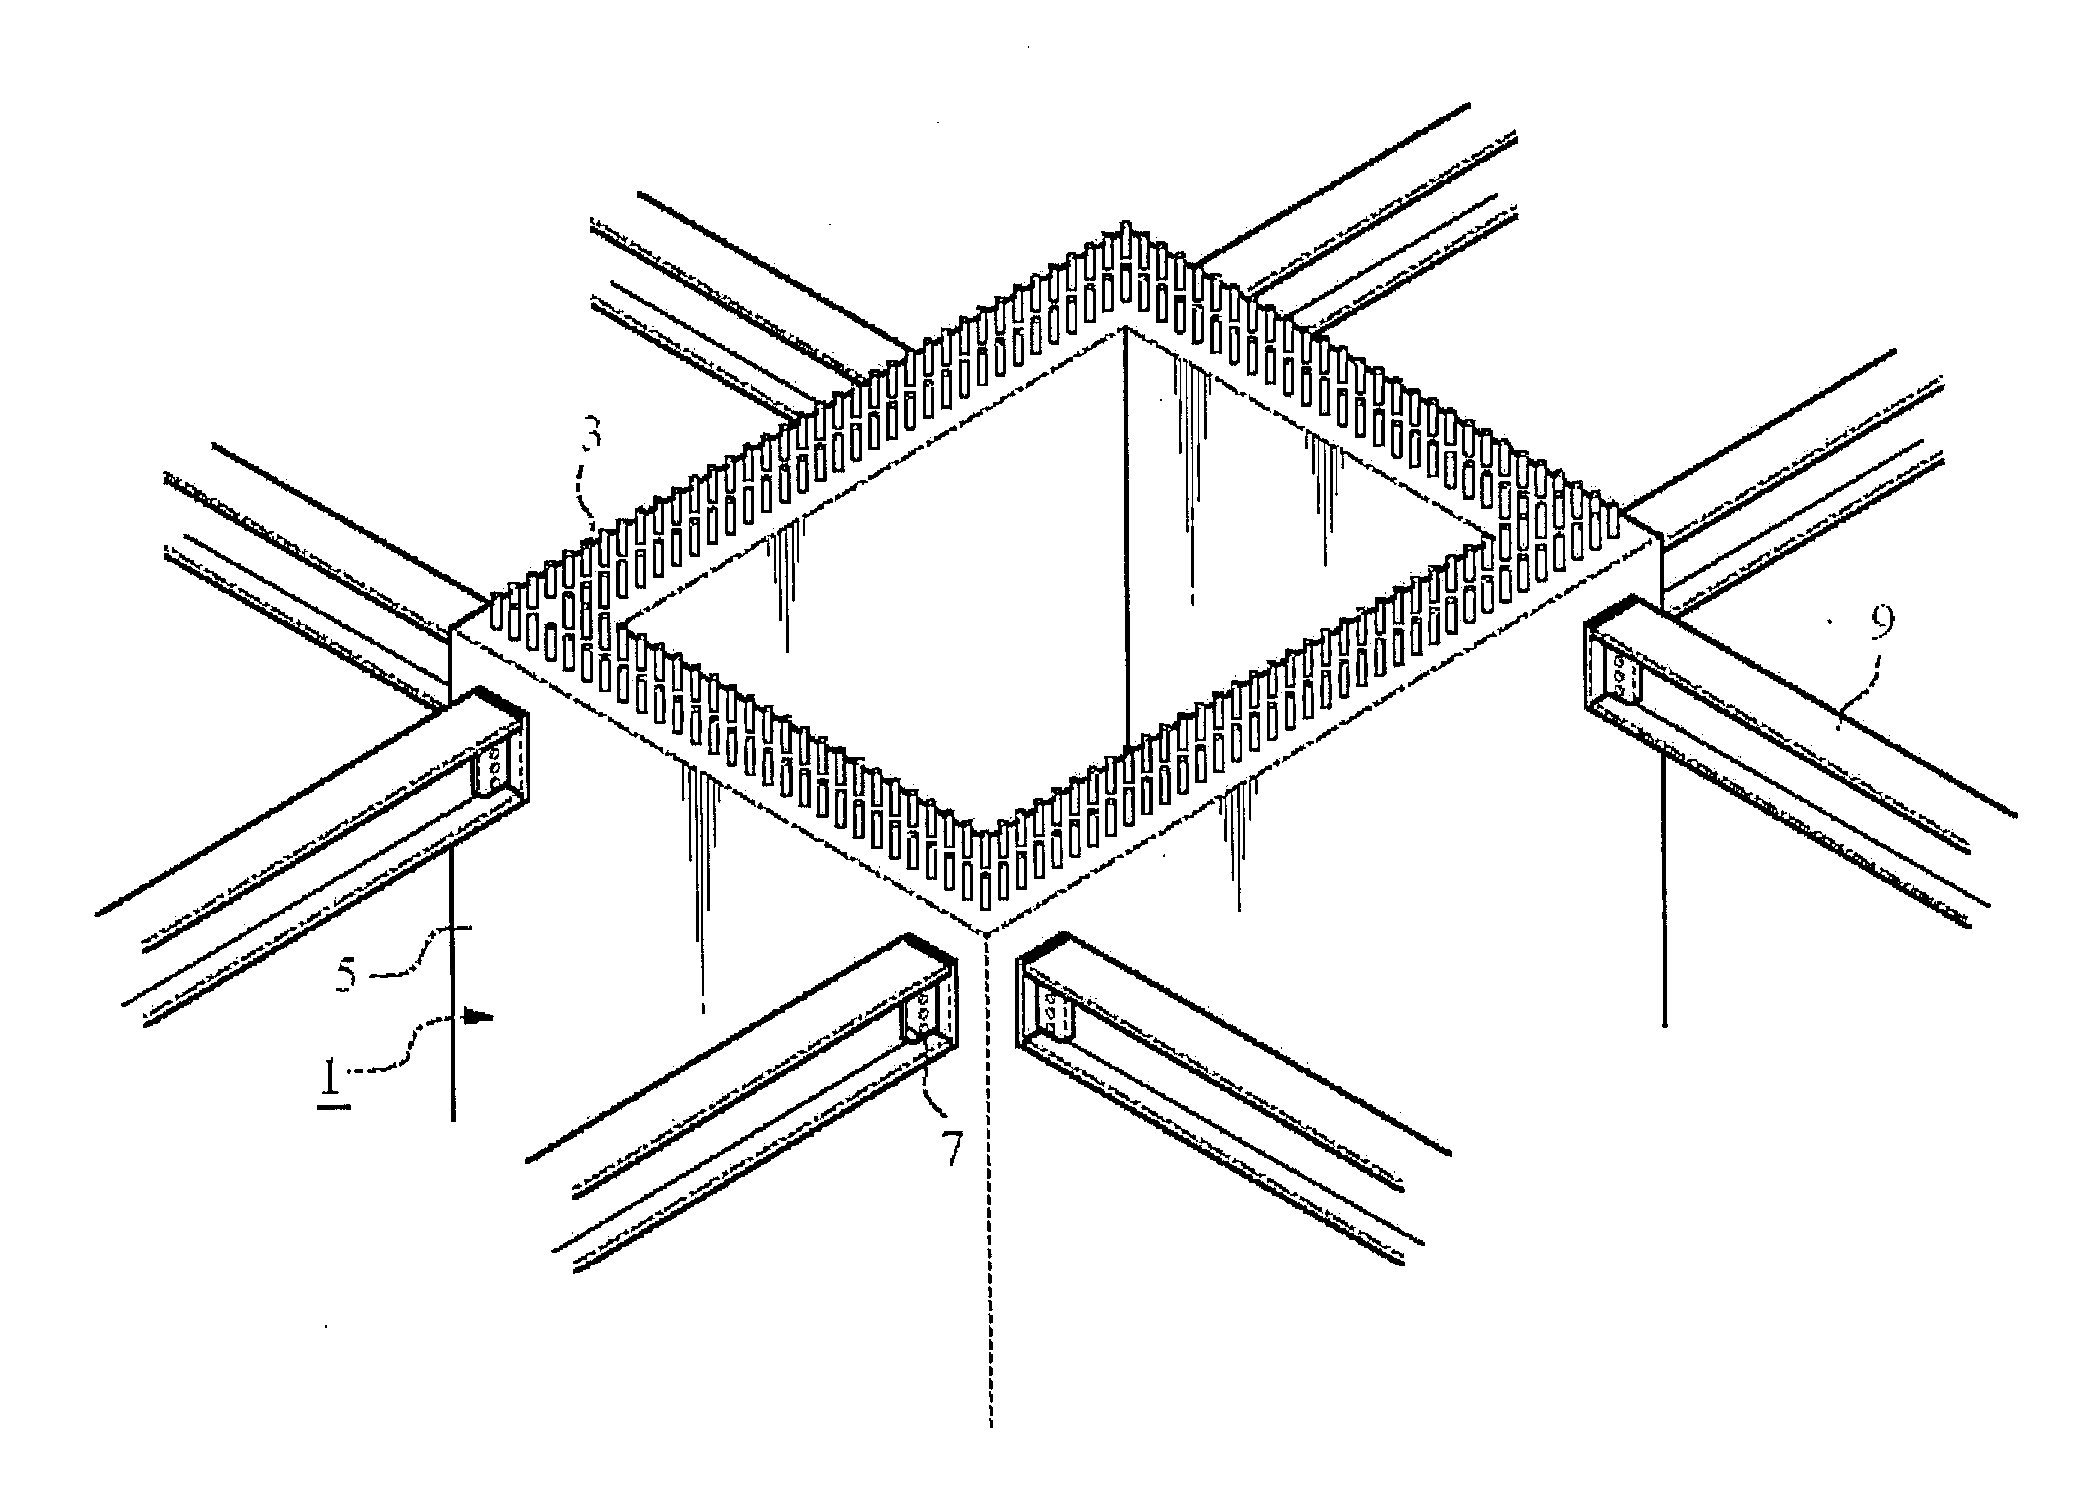 Structure For Constructing a High-Rise Building Having a Reinforced Concrete Structure Including a Steel Frame